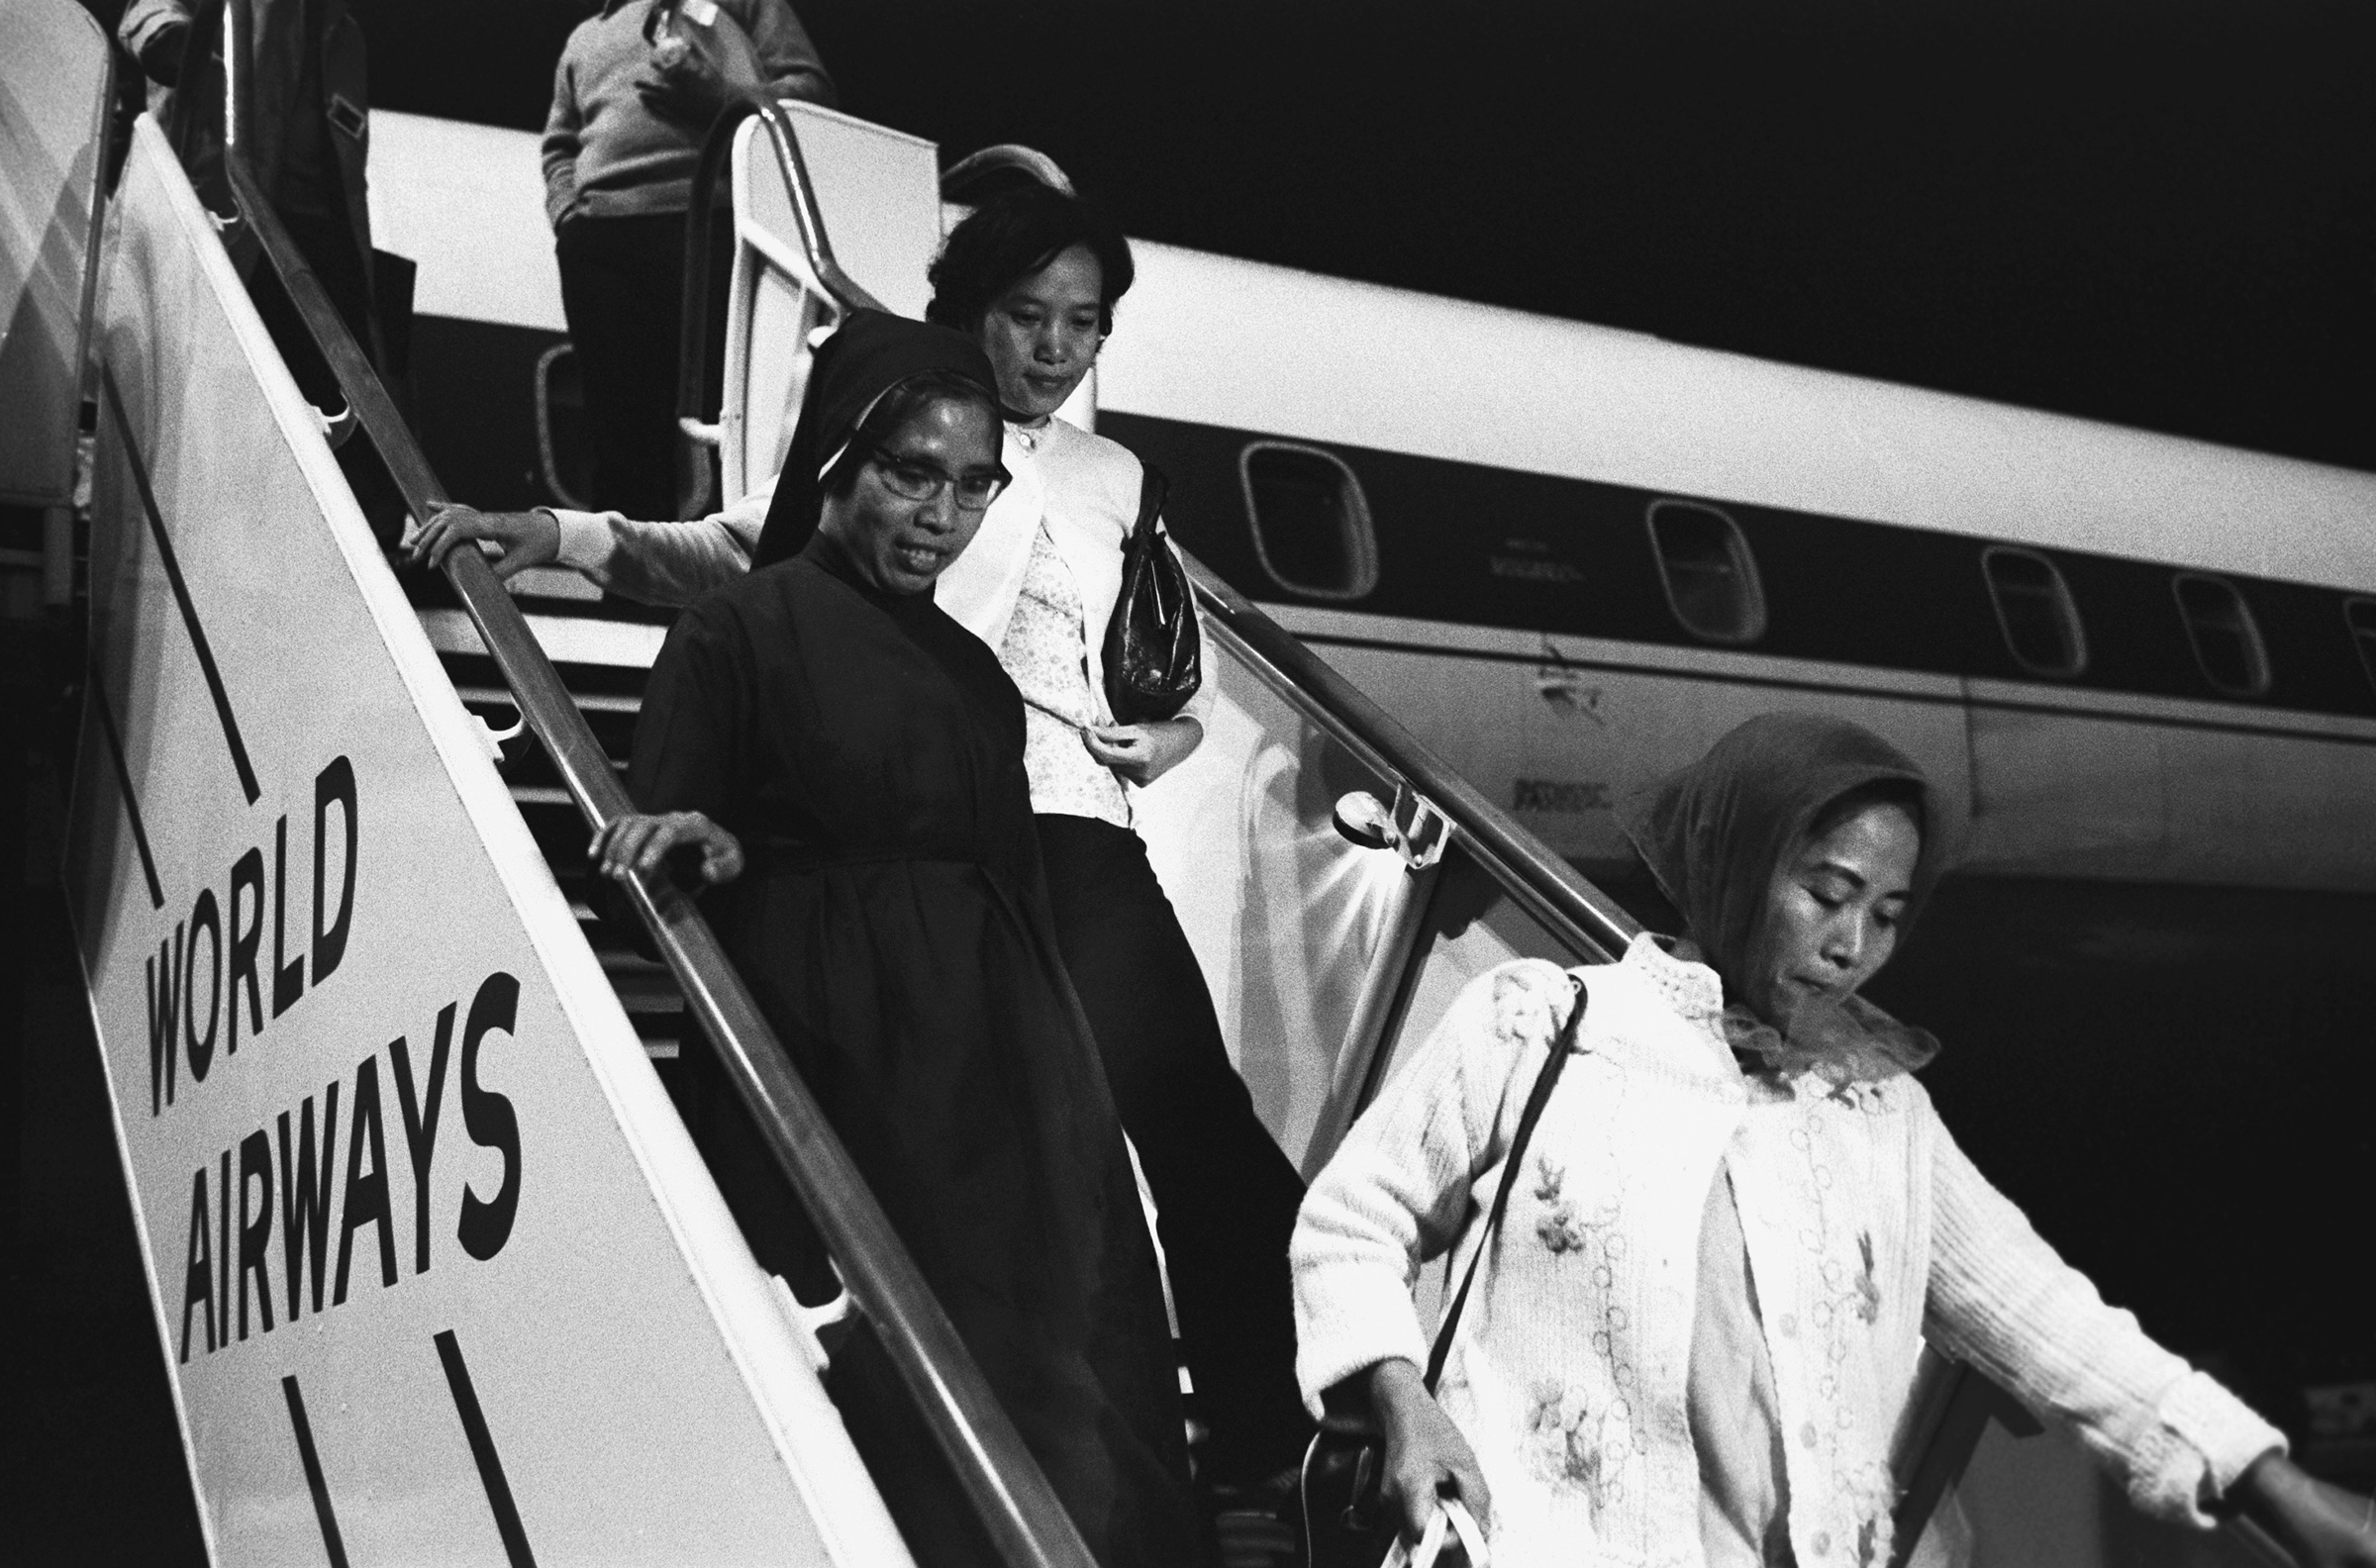 Refugees from Vietnam descend a flight of stairs from an airplane in Oakland, California, April 1975